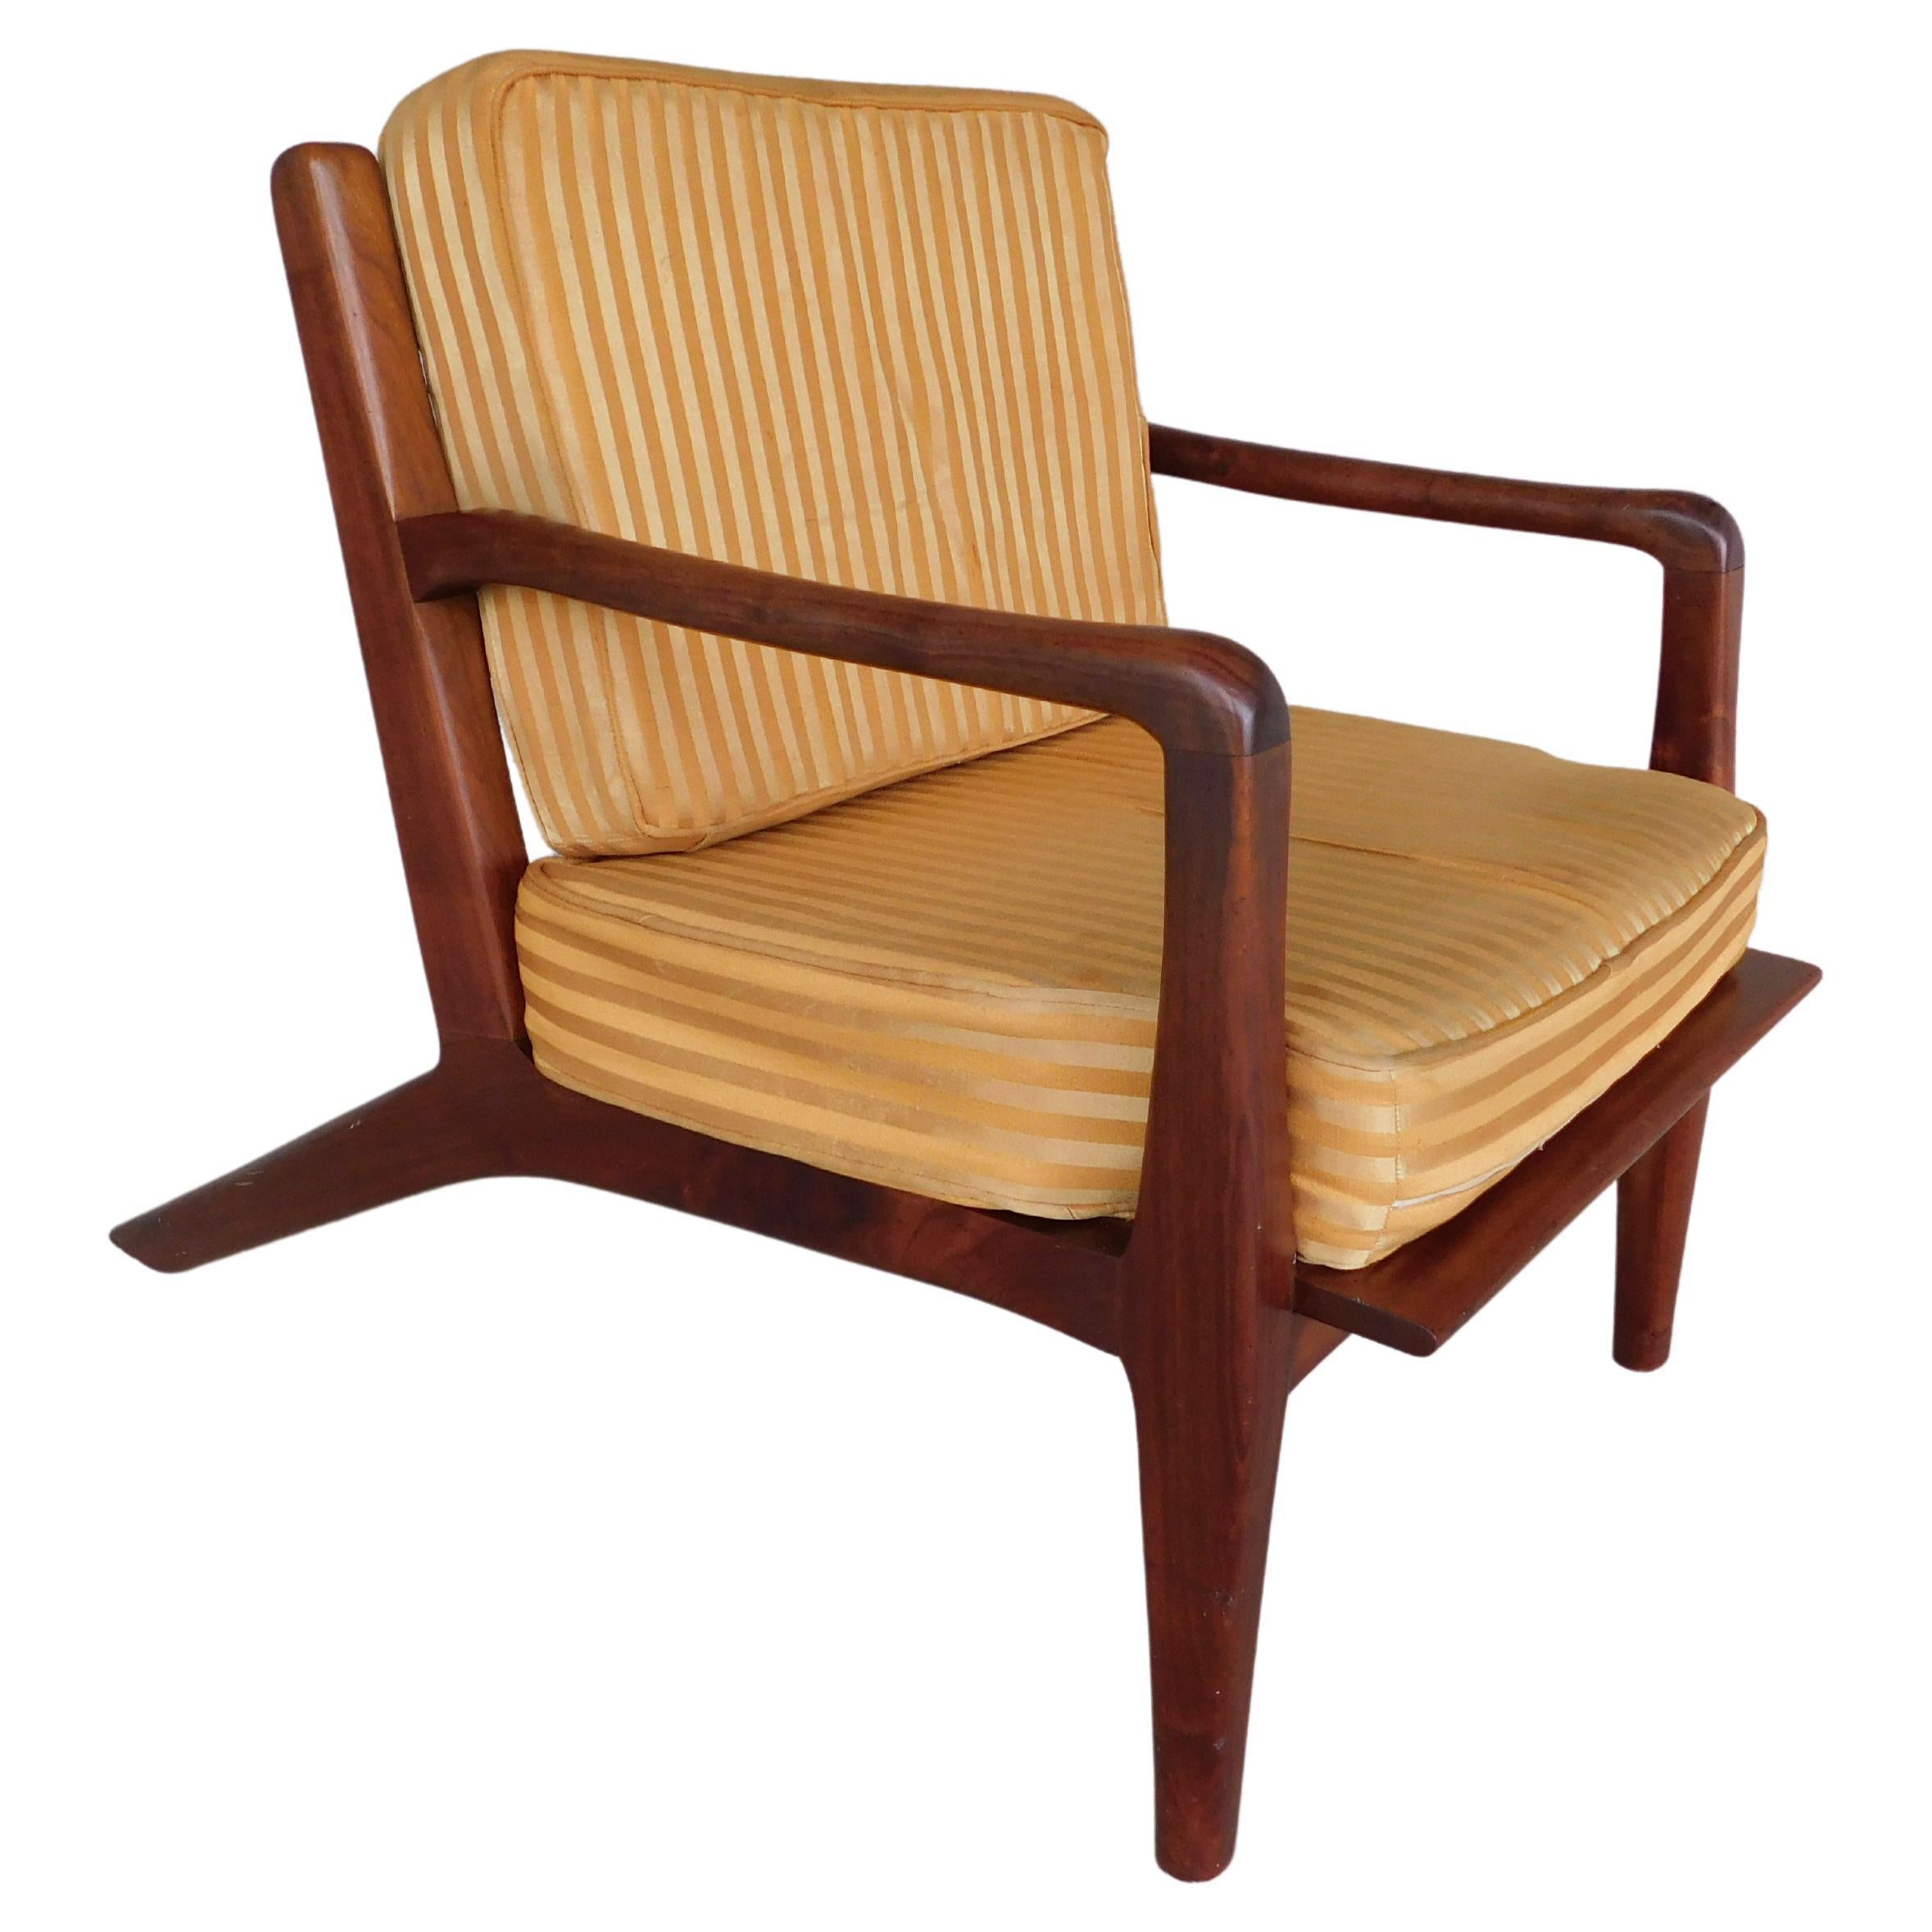 Vintage teak midcentury lounge chair attributed to Hans Wegner. Unsigned chair with unique teak handcrafted style. Horizontal back support slats, slightly slung arm design with rolled over hand rest. Long raked rear legs adding to the stance.